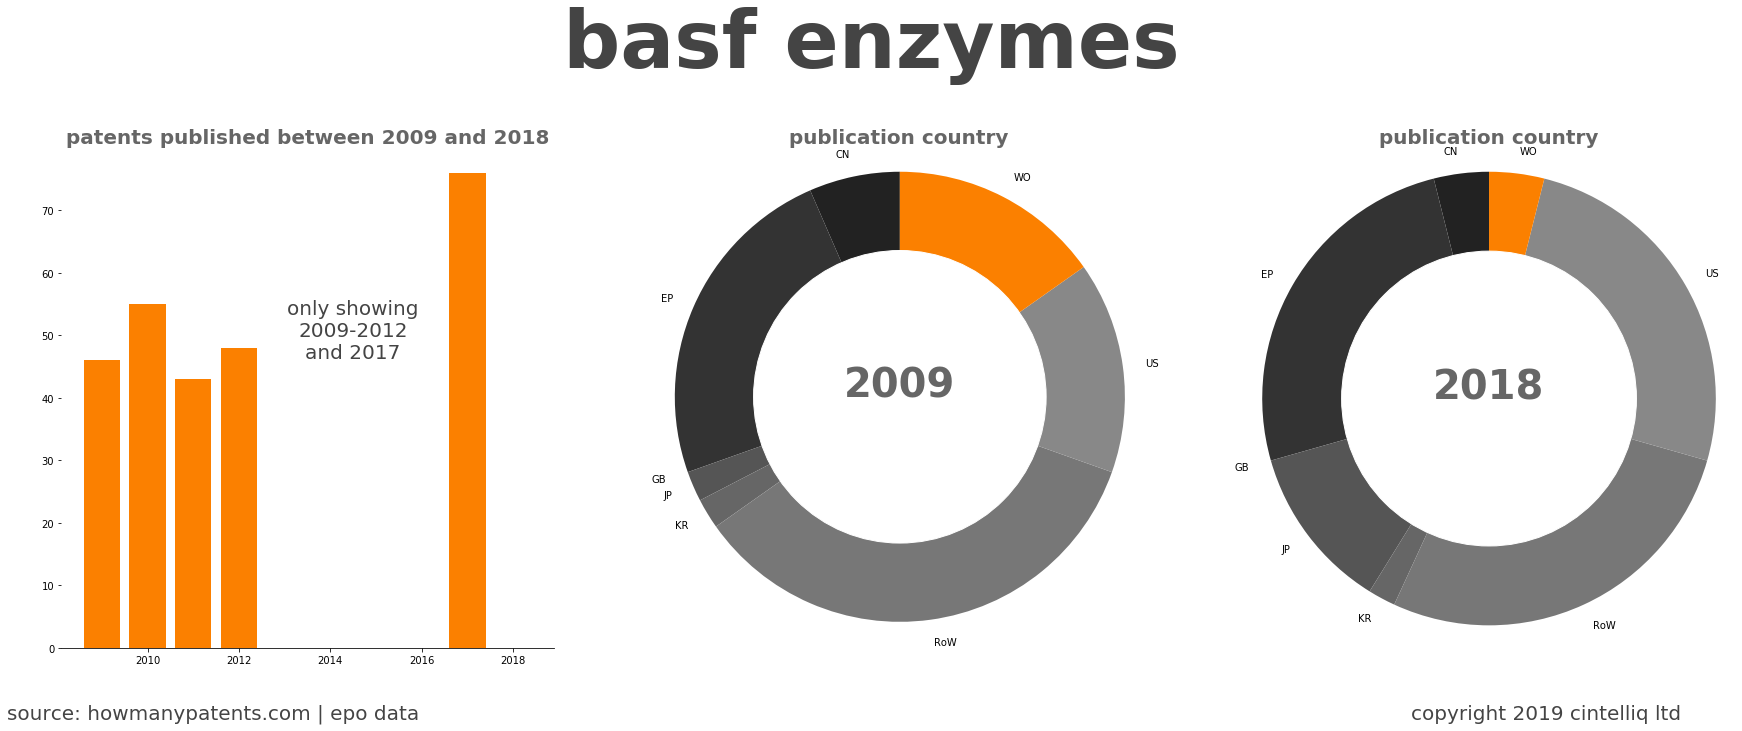 summary of patents for Basf Enzymes